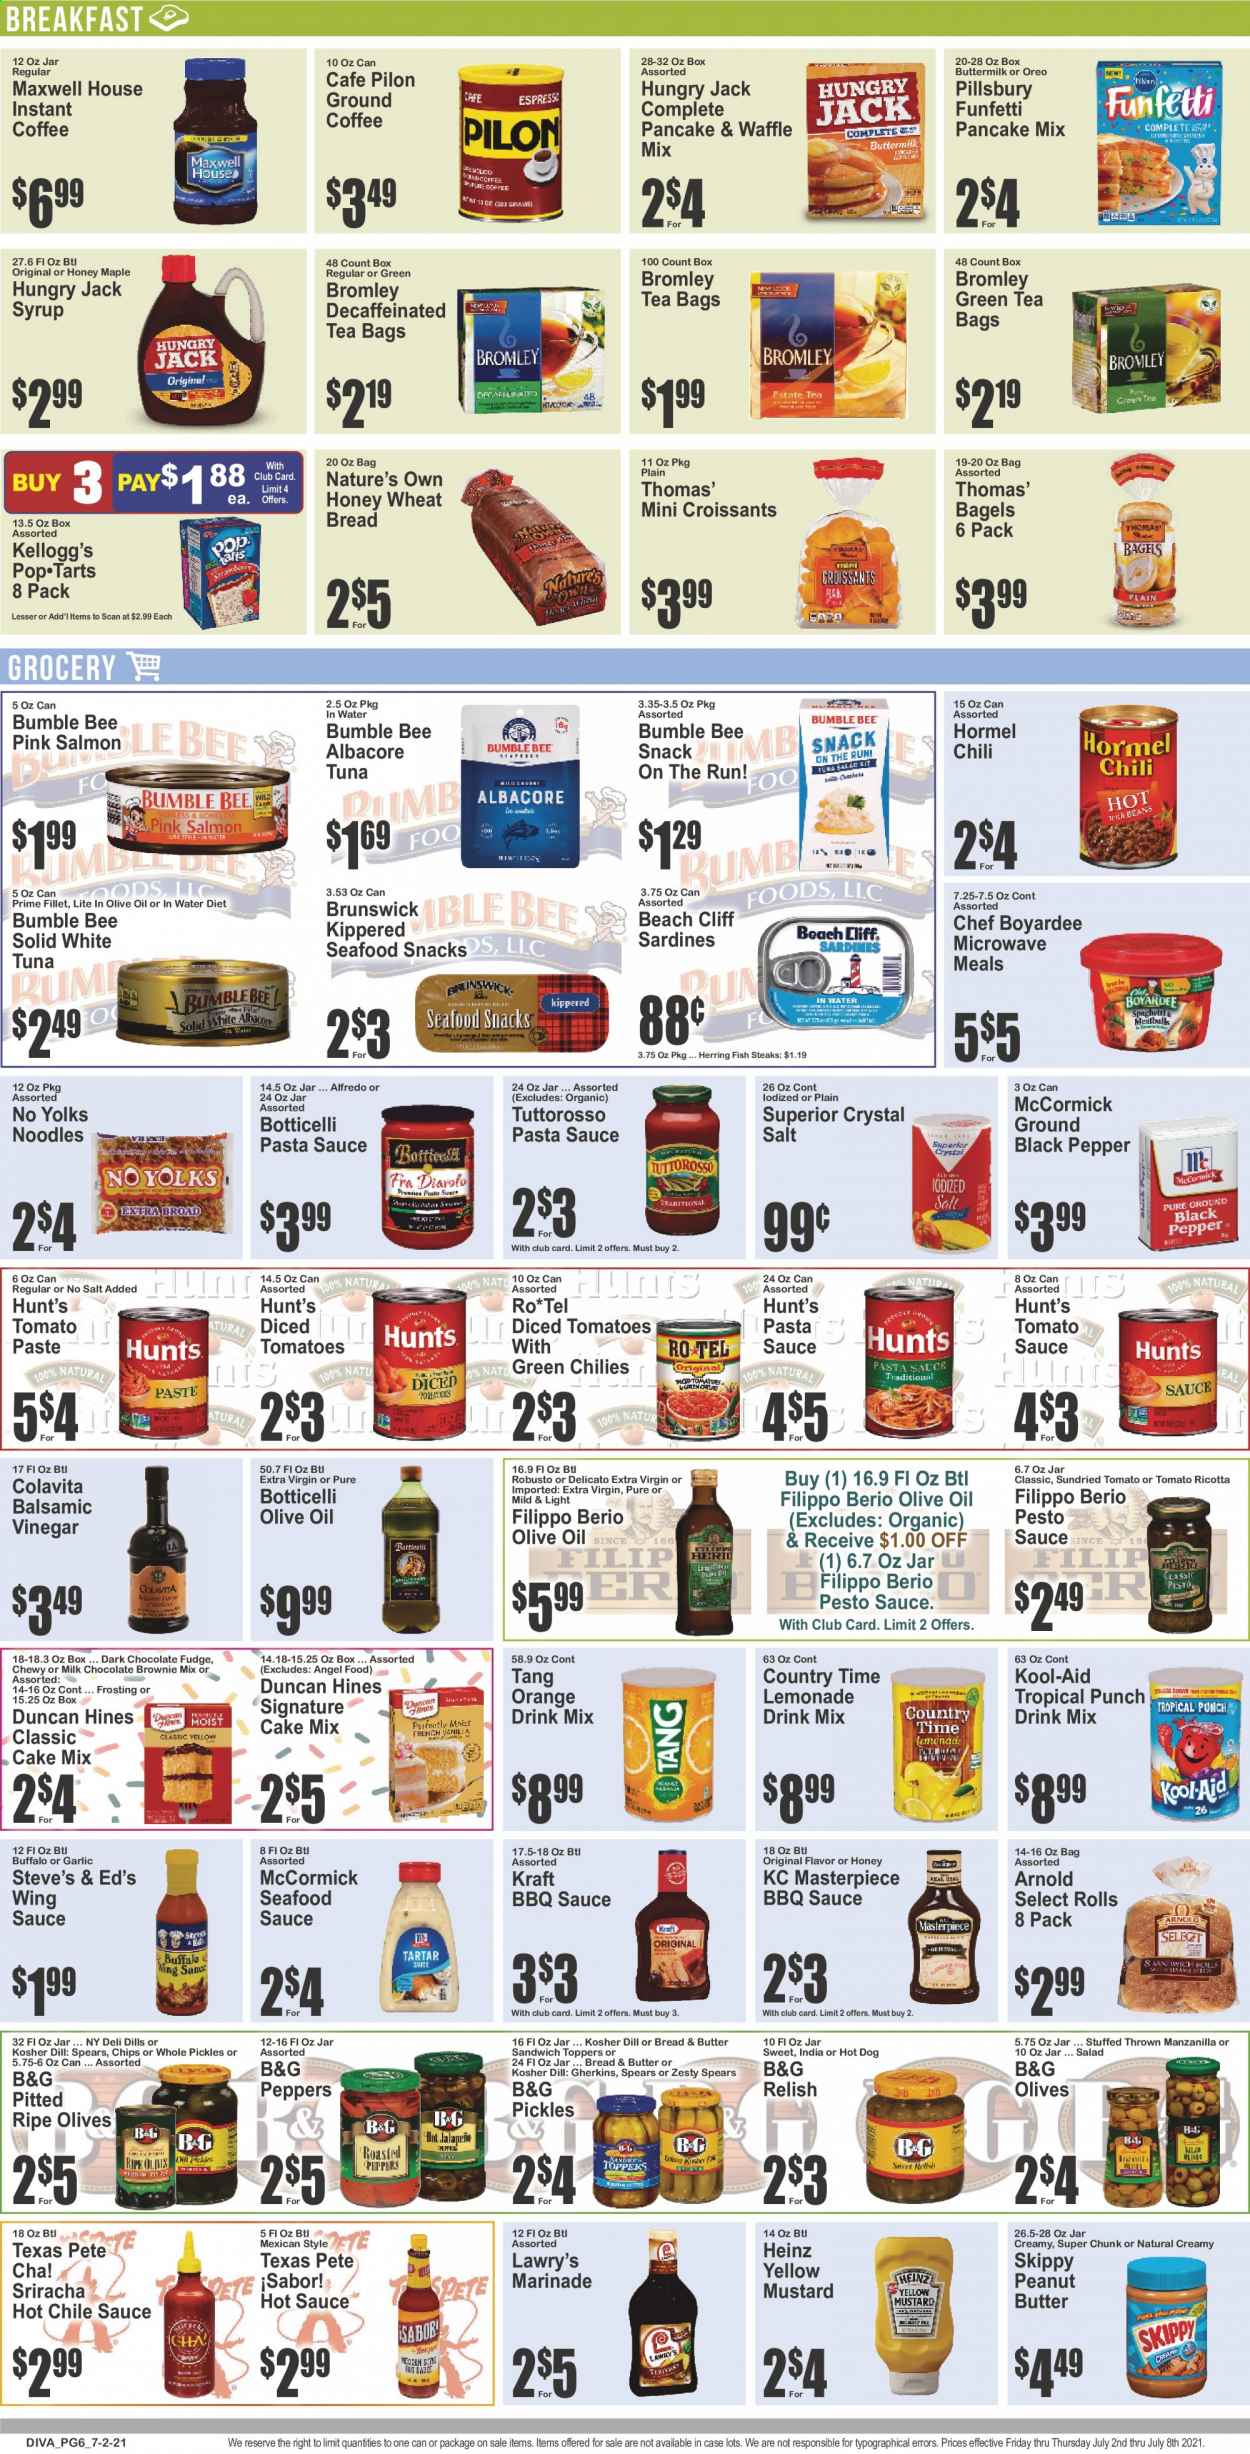 thumbnail - Key Food Flyer - 07/02/2021 - 07/08/2021 - Sales products - bagels, wheat bread, Angel Food, brownie mix, cake mix, garlic, tomatoes, salad, peppers, oranges, salmon, sardines, tuna, herring, seafood, fish, fish steak, hot dog, pasta sauce, Bumble Bee, pancakes, Pillsbury, noodles, Kraft®, Hormel, ricotta, Oreo, buttermilk, fudge, milk chocolate, chocolate, snack, Kellogg's, dark chocolate, chips, frosting, tomato paste, tomato sauce, Heinz, pickles, olives, Chef Boyardee, dill, BBQ sauce, mustard, sriracha, hot sauce, pesto, marinade, wing sauce, balsamic vinegar, extra virgin olive oil, peanut butter, syrup, lemonade, Country Time, fruit punch, green tea, Maxwell House, tea bags, instant coffee, ground coffee, steak, Nature's Own. Page 6.